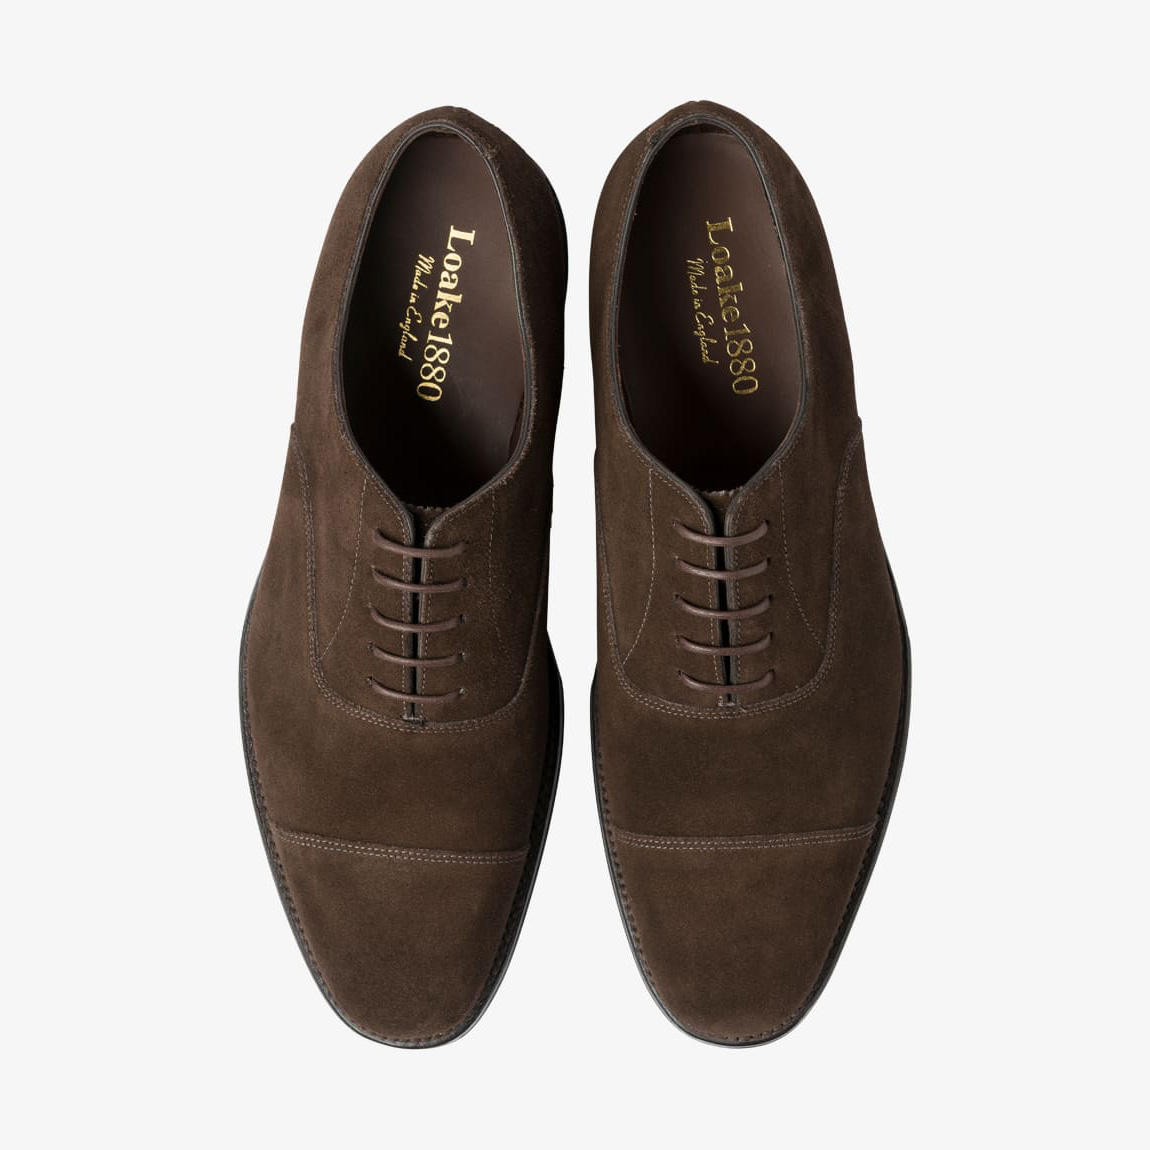 Loake Aldwych Chocolate Brown Suede Oxford Toe Cap